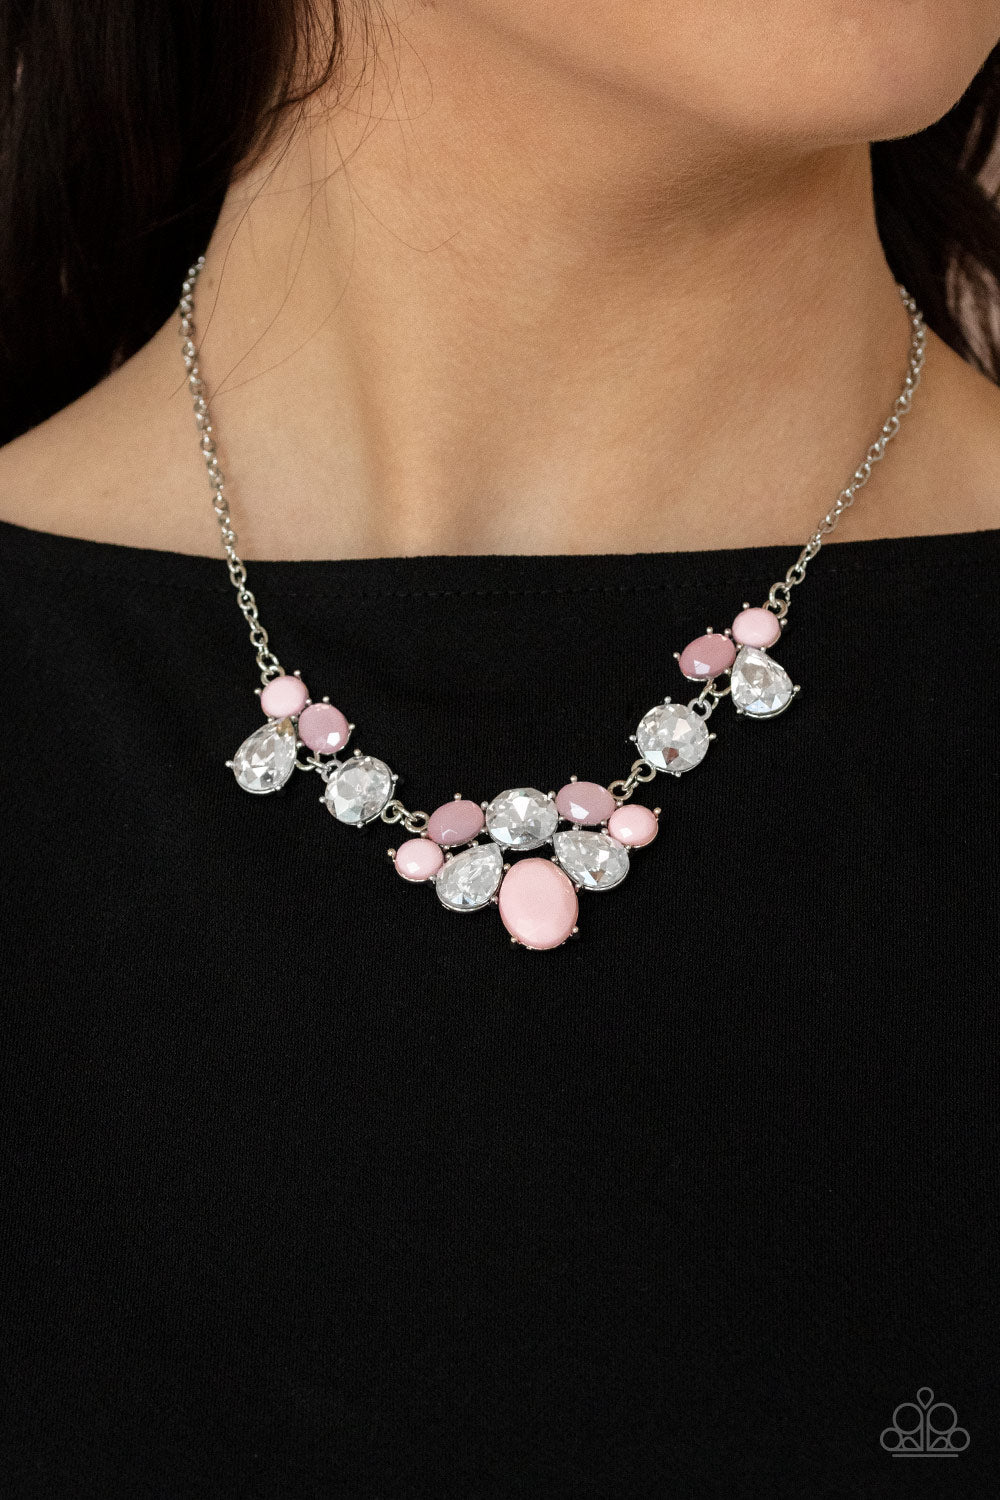 Paparazzi Accessories Ethereal Romance - Pink Necklaces varying in opacity and shape, mismatched pink beads attach to oversized white rhinestones, creating bubbly frames that delicately link into an ethereal display below the collar. Features an adjustable clasp closure.  Sold as one individual necklace. Includes one pair of matching earrings.  Paparazzi Jewelry is lead and nickel free so it's perfect for sensitive skin too!